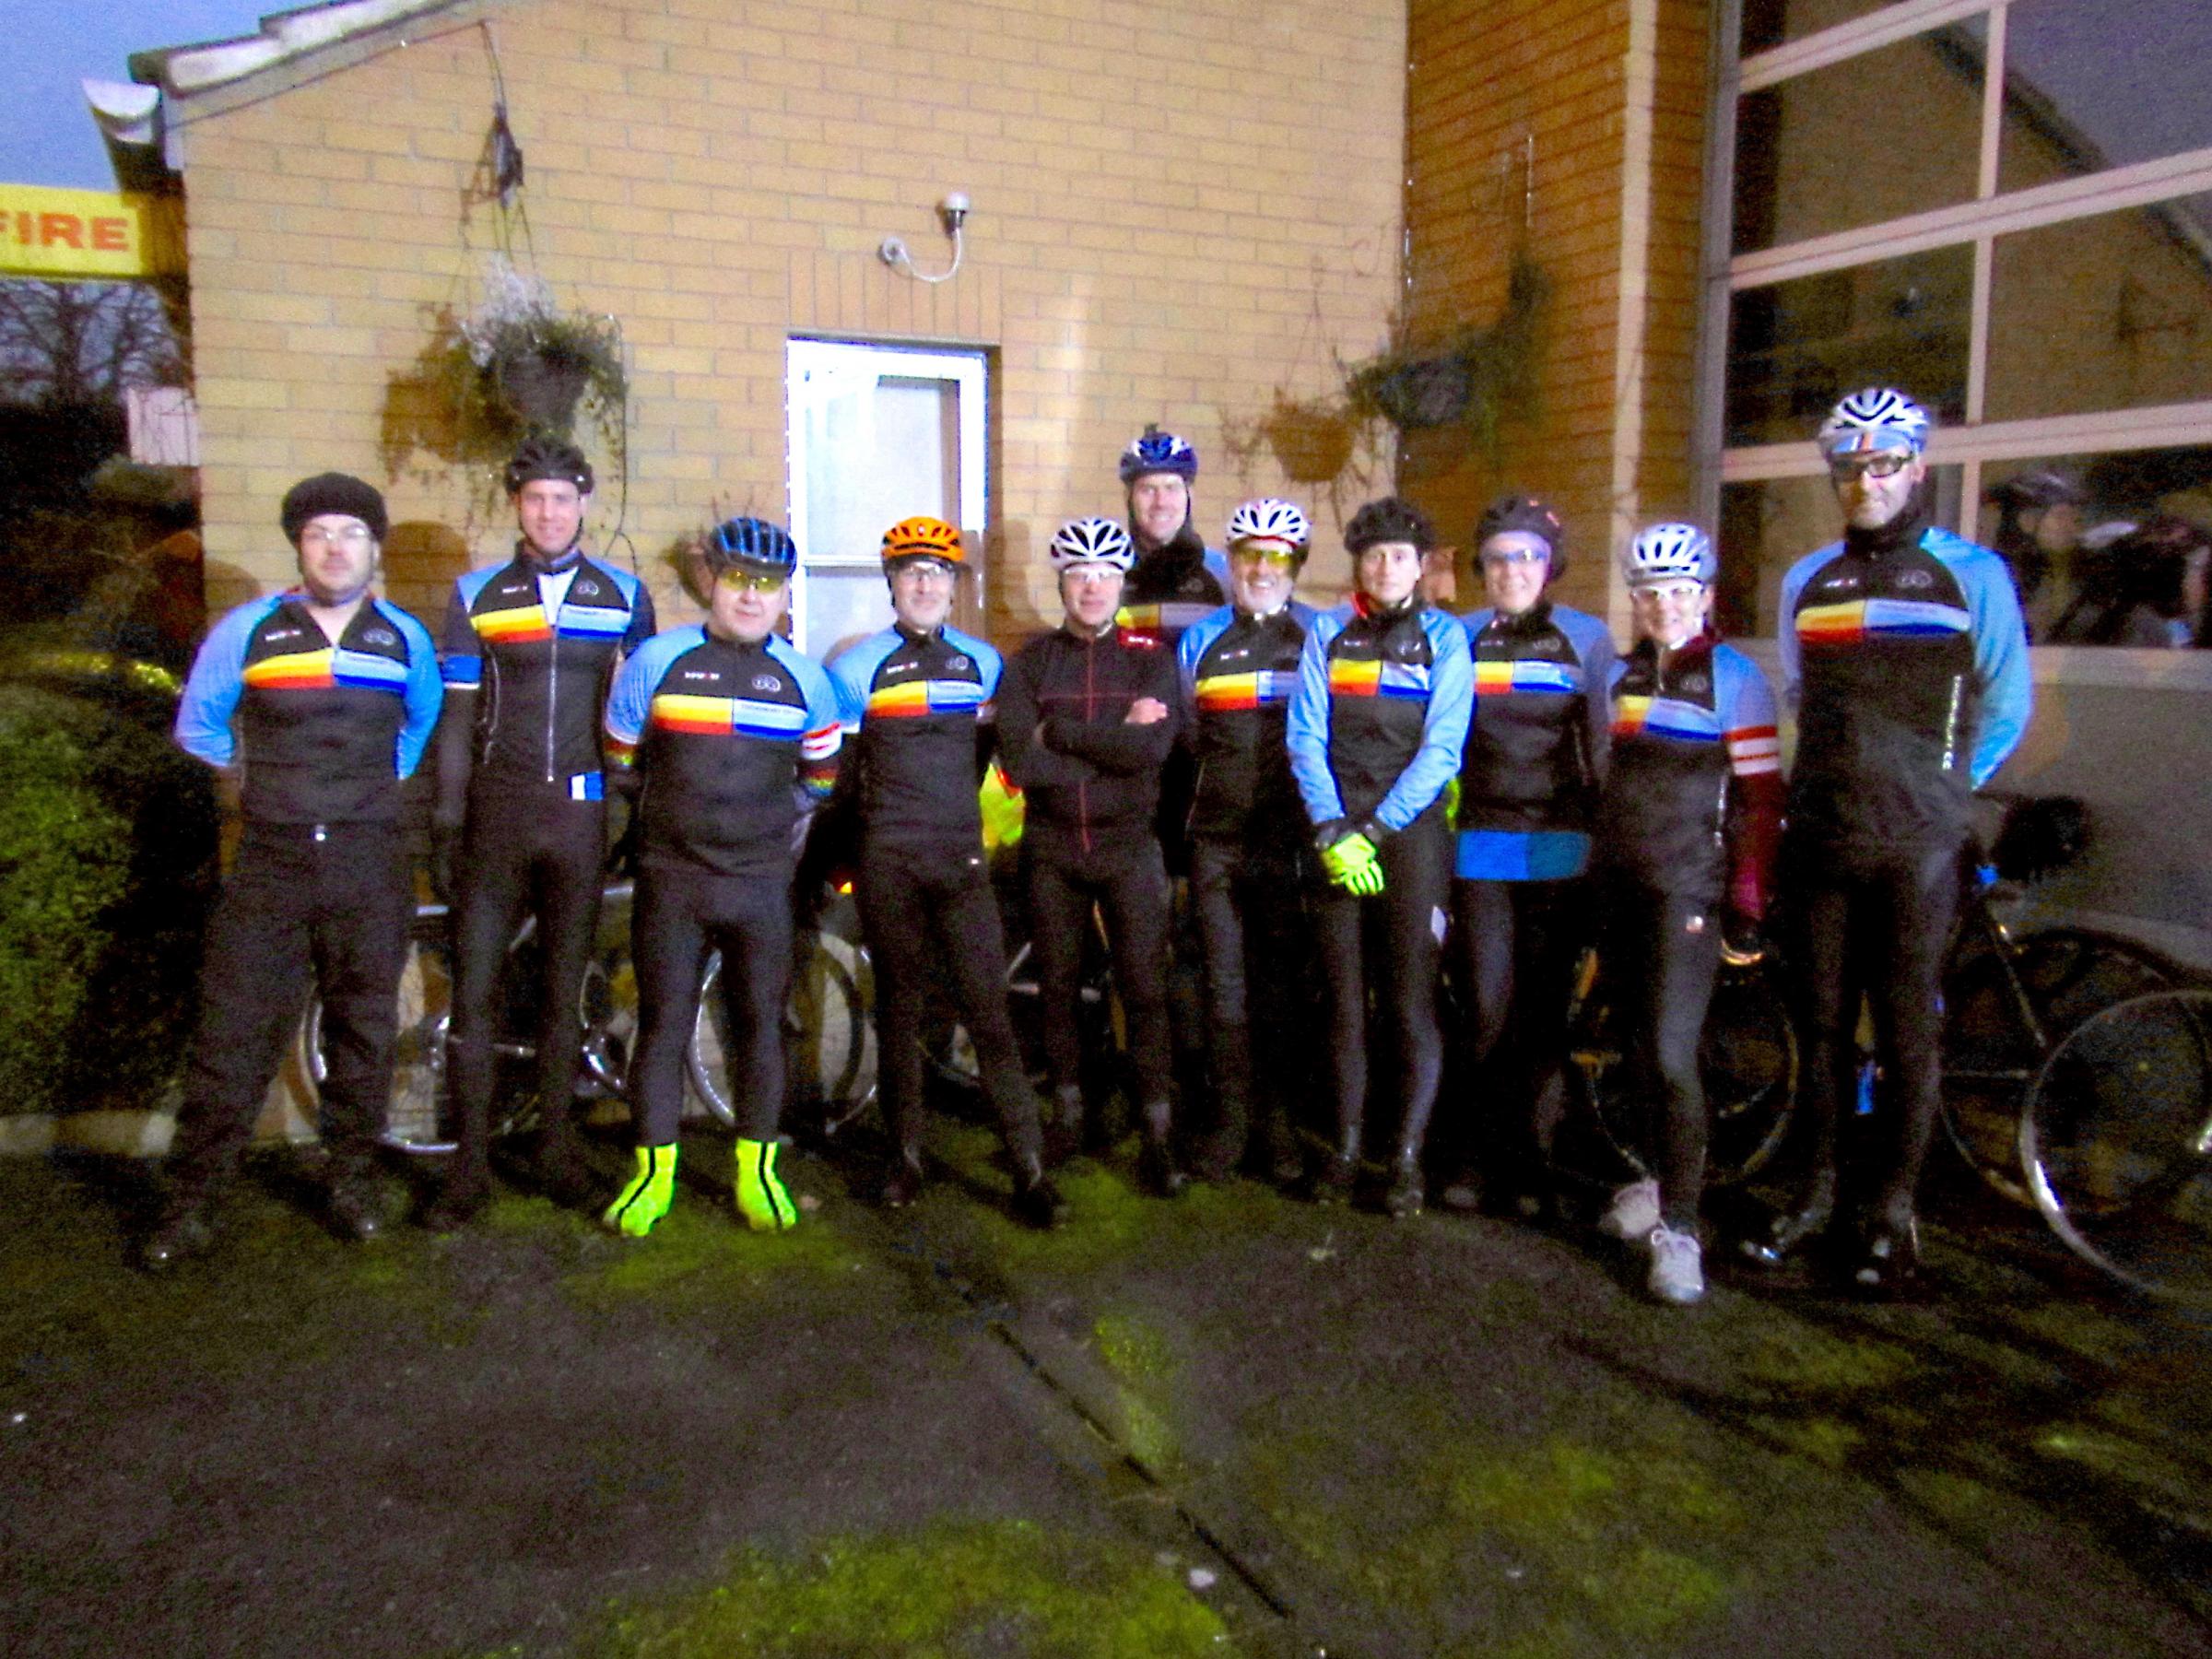 Riders take to the streets for Thornbury Cycling Club first birthday celebrations - Gazette Series